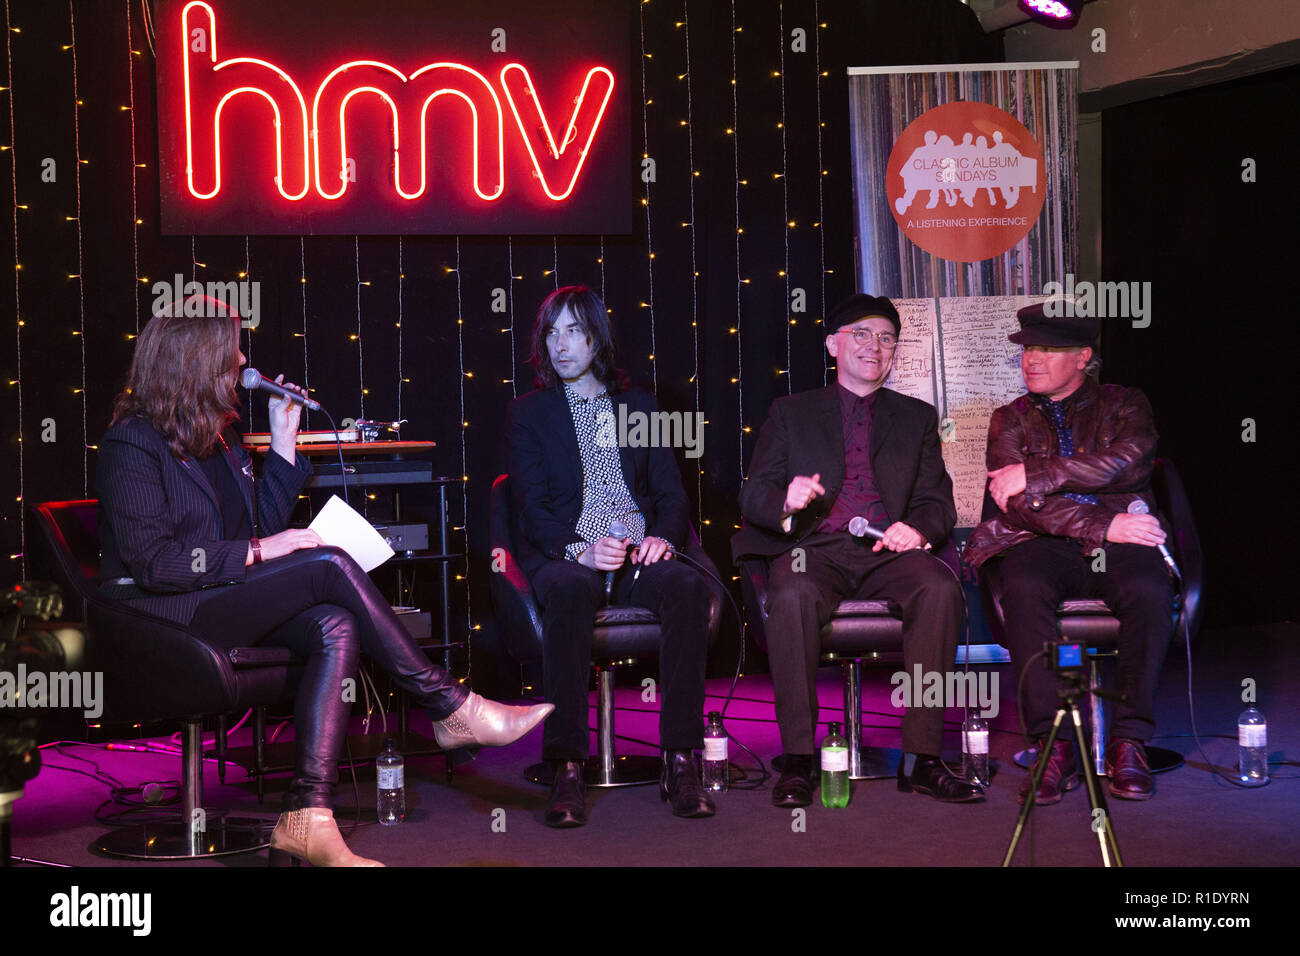 To celebrate the first National Album Day, hmv host a special album playback event with Primal Scream frontman Bobby Gillespie and Colleen ‘Cosmo’ Murphy  Featuring: Colleen 'Cosmo' Murphy, Bobby Gillespie, Andrew Innes, Martin Duffy, Primal Scream Where: London, United Kingdom When: 11 Oct 2018 Credit: Maria Jefferis/WENN Stock Photo